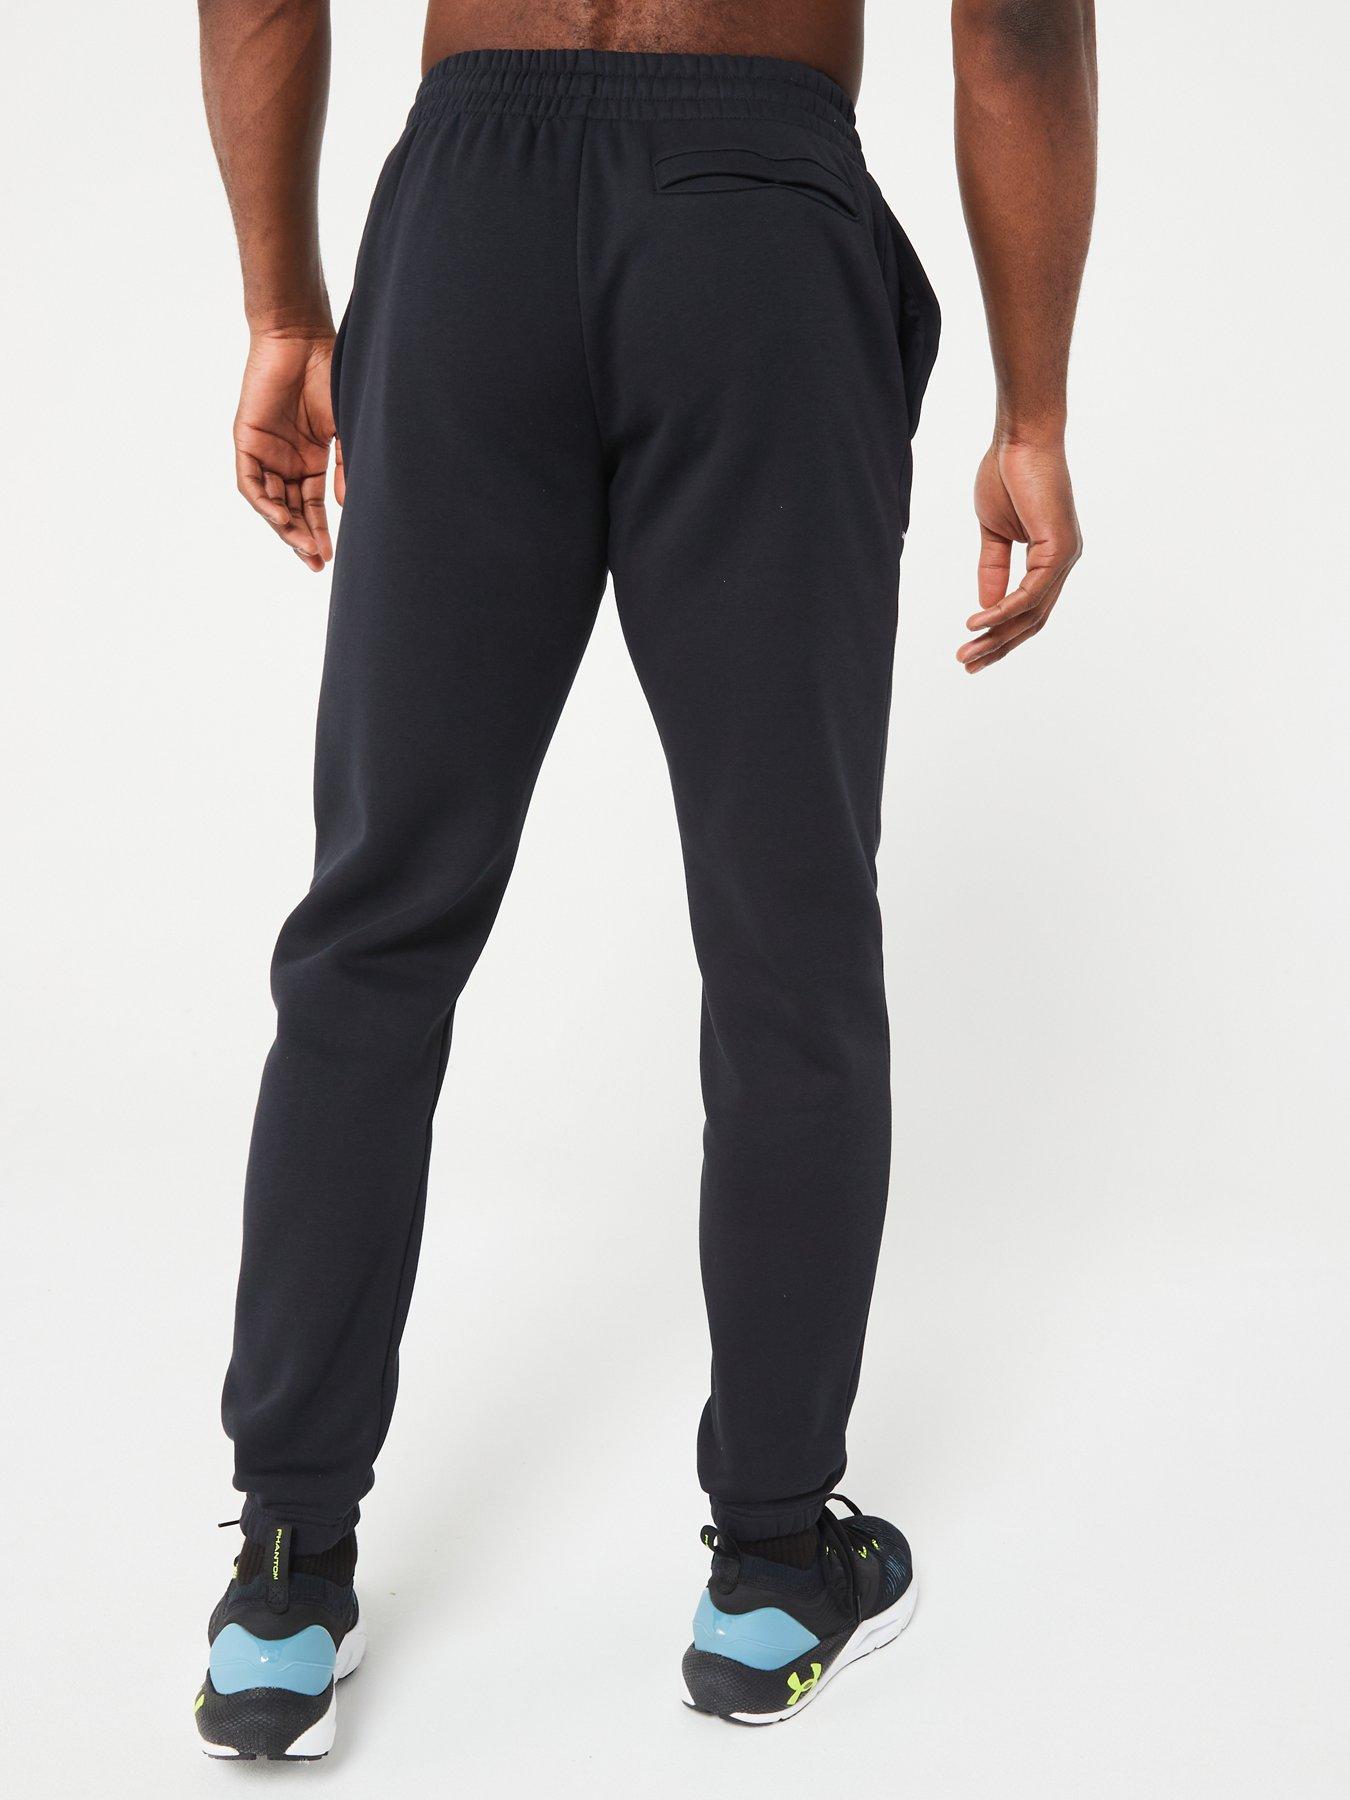 Under Armour Youth Essential Pant